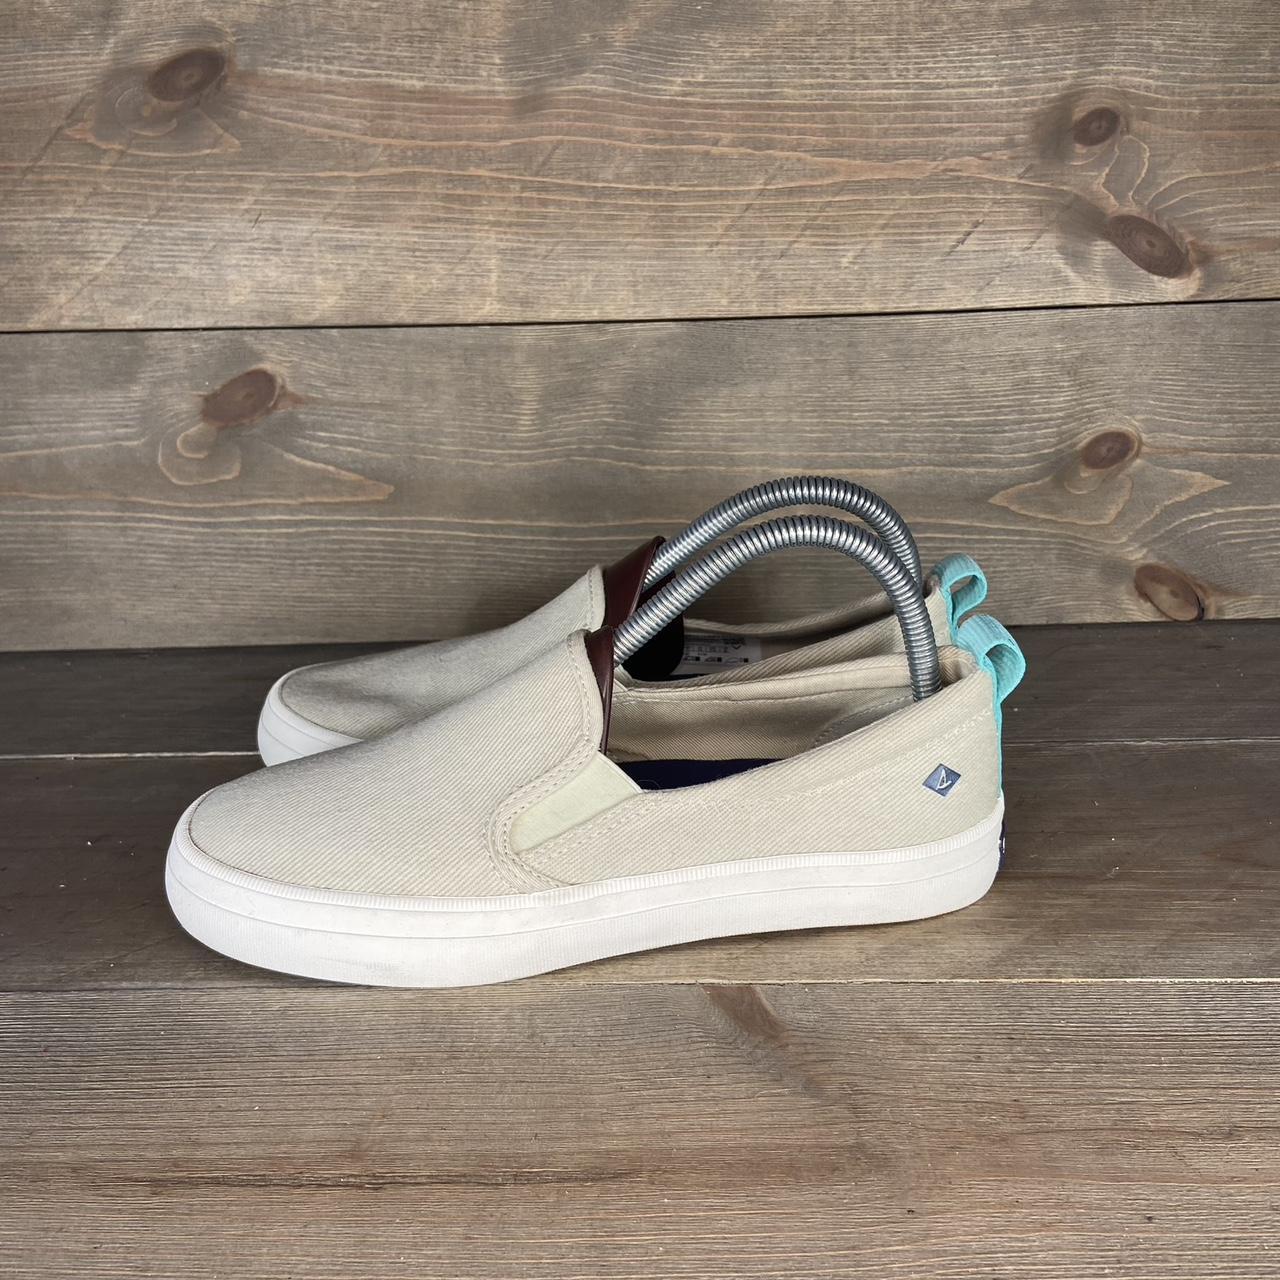 Sperry Women's Cream and White Trainers